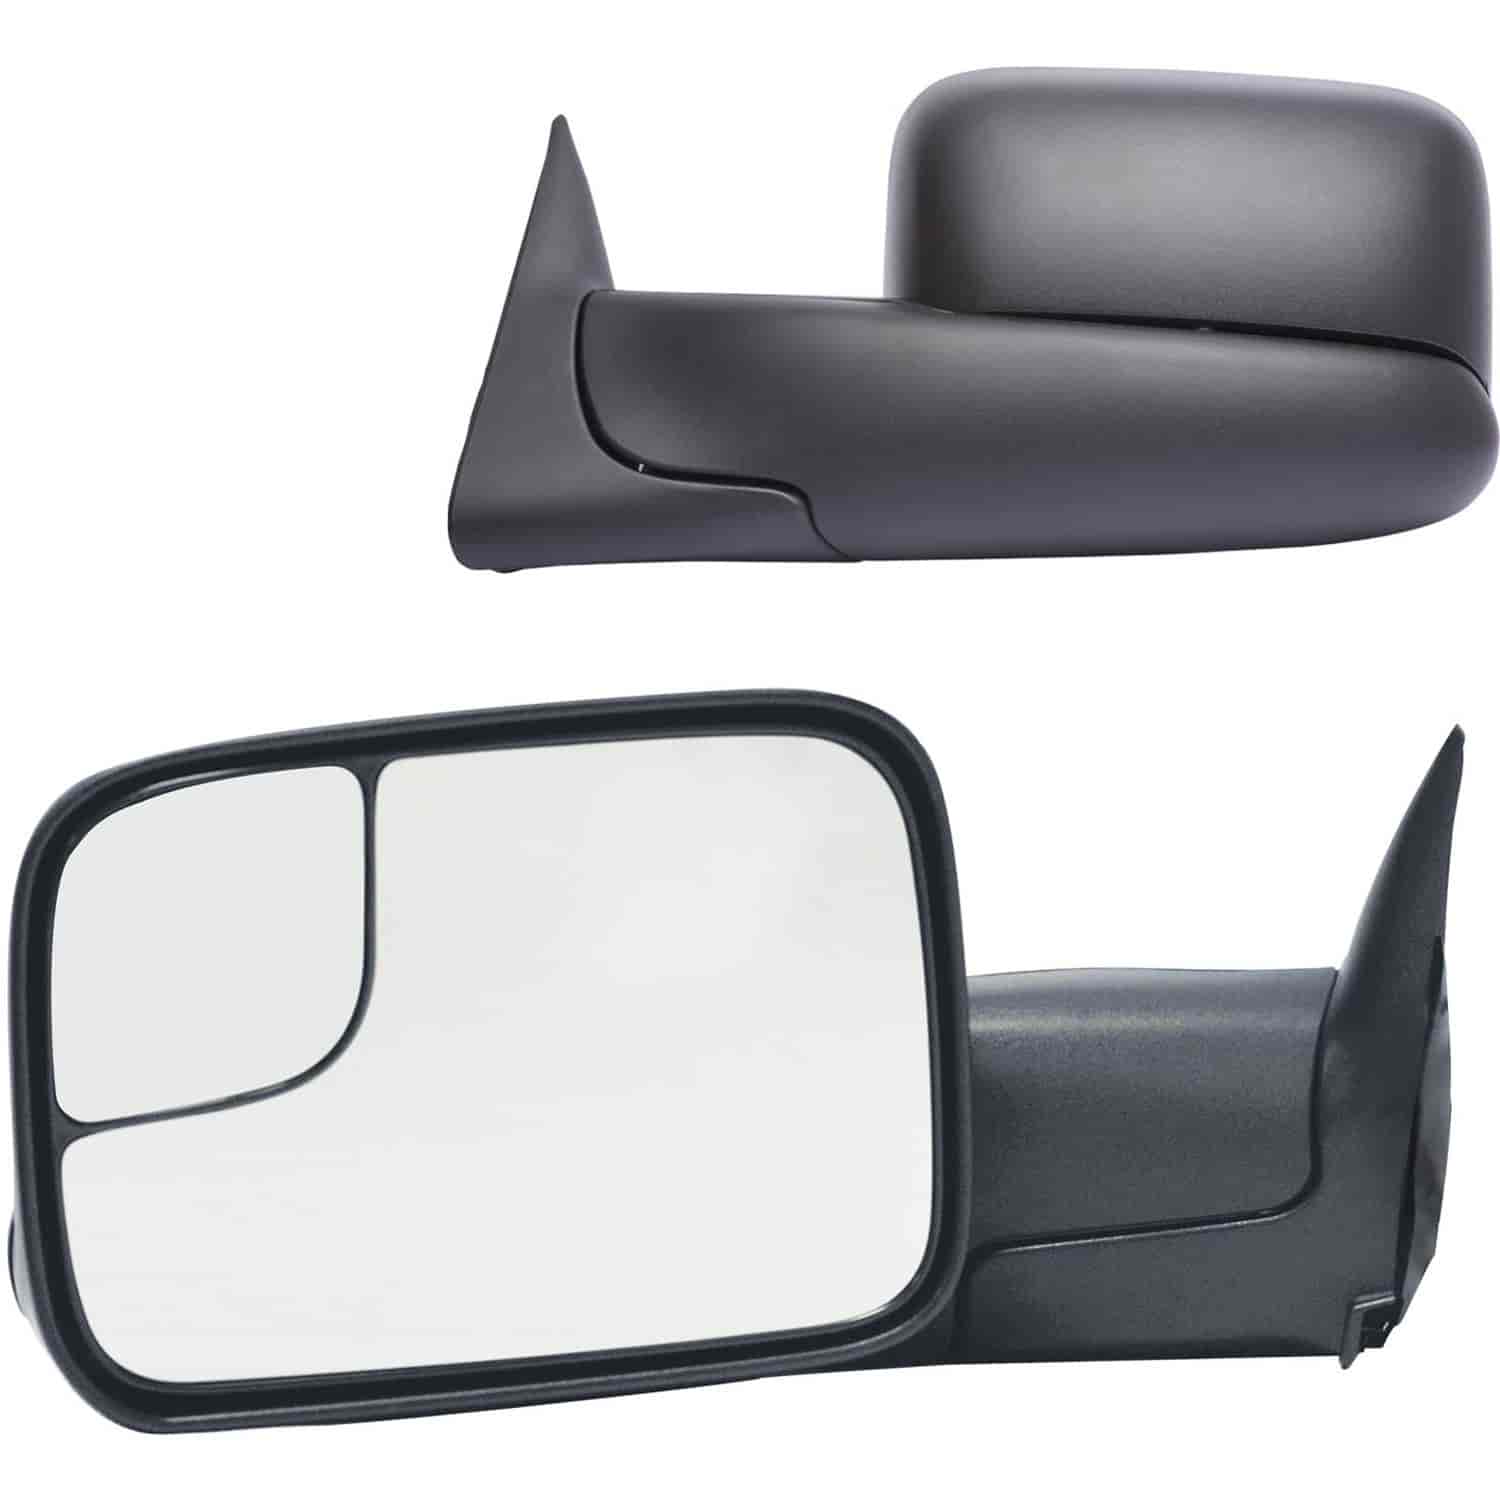 OEM Style Replacement Mirror Fits Dodge Ram Pickups